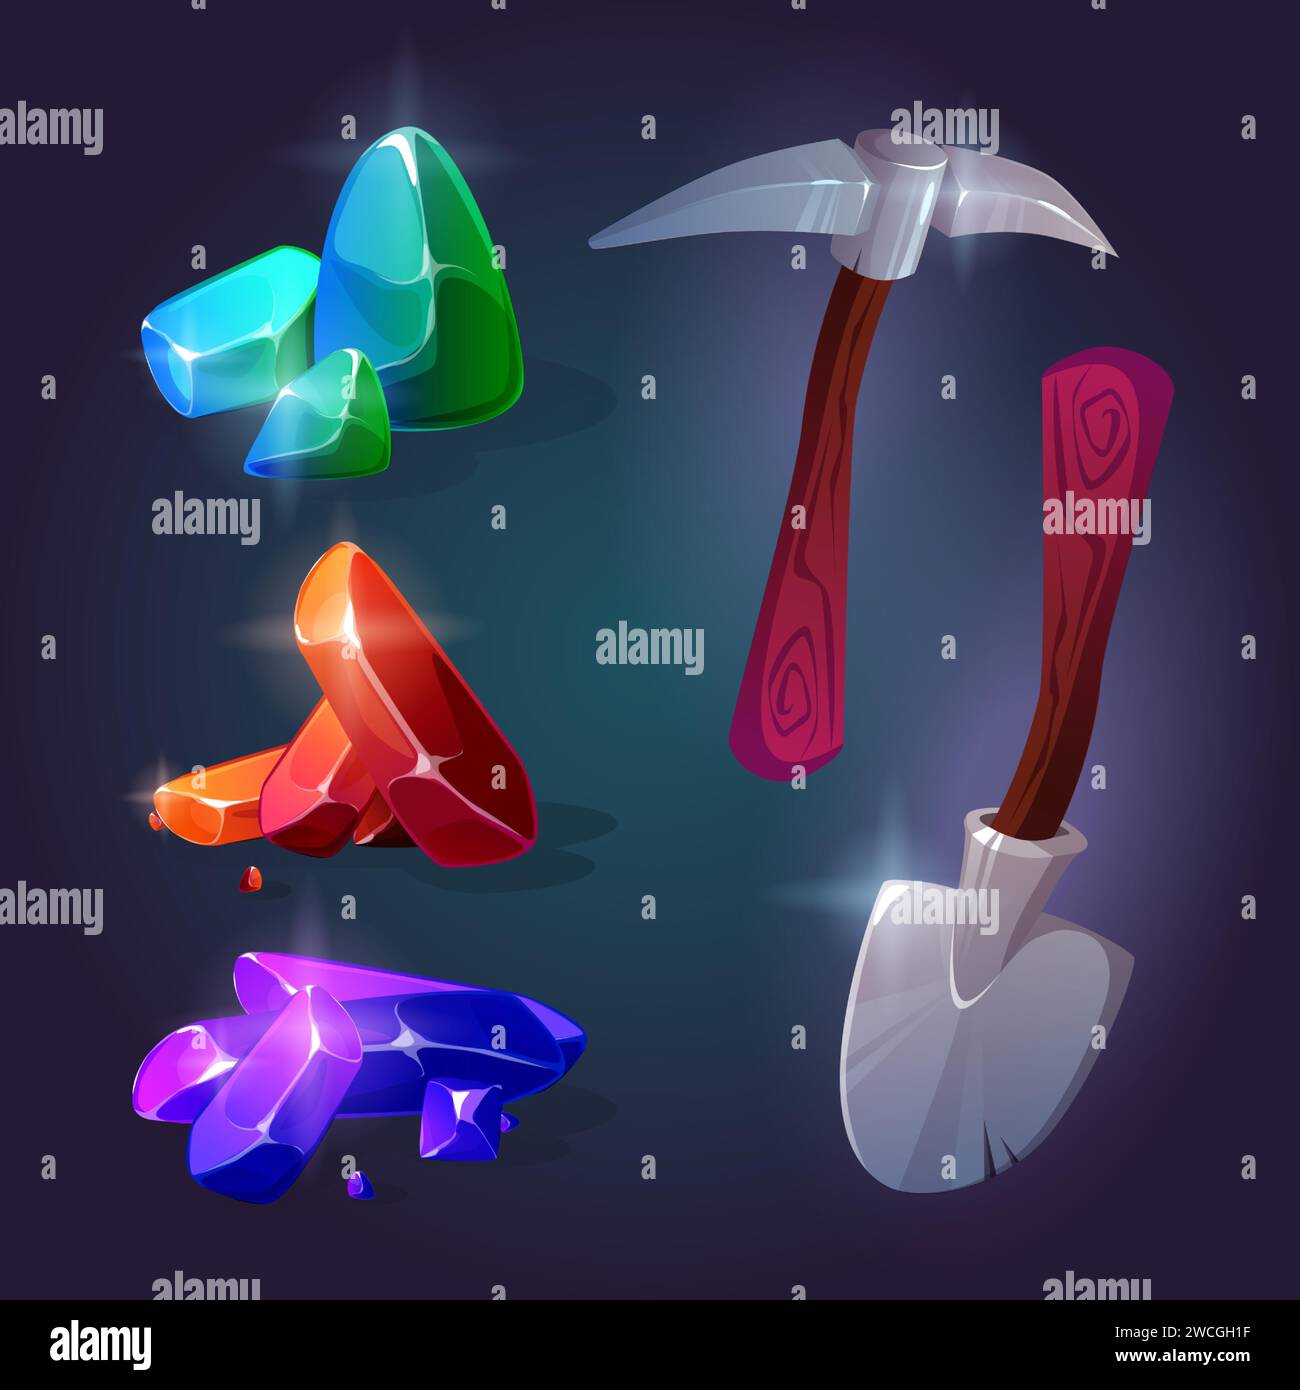 Diamonds and gemstones mine game icons. Cartoon vector set of gui asset of precious stone miner - pile of red, green and purple shiny gem crystals, shovel and pickaxe with wooden handle for extraction Stock Vector